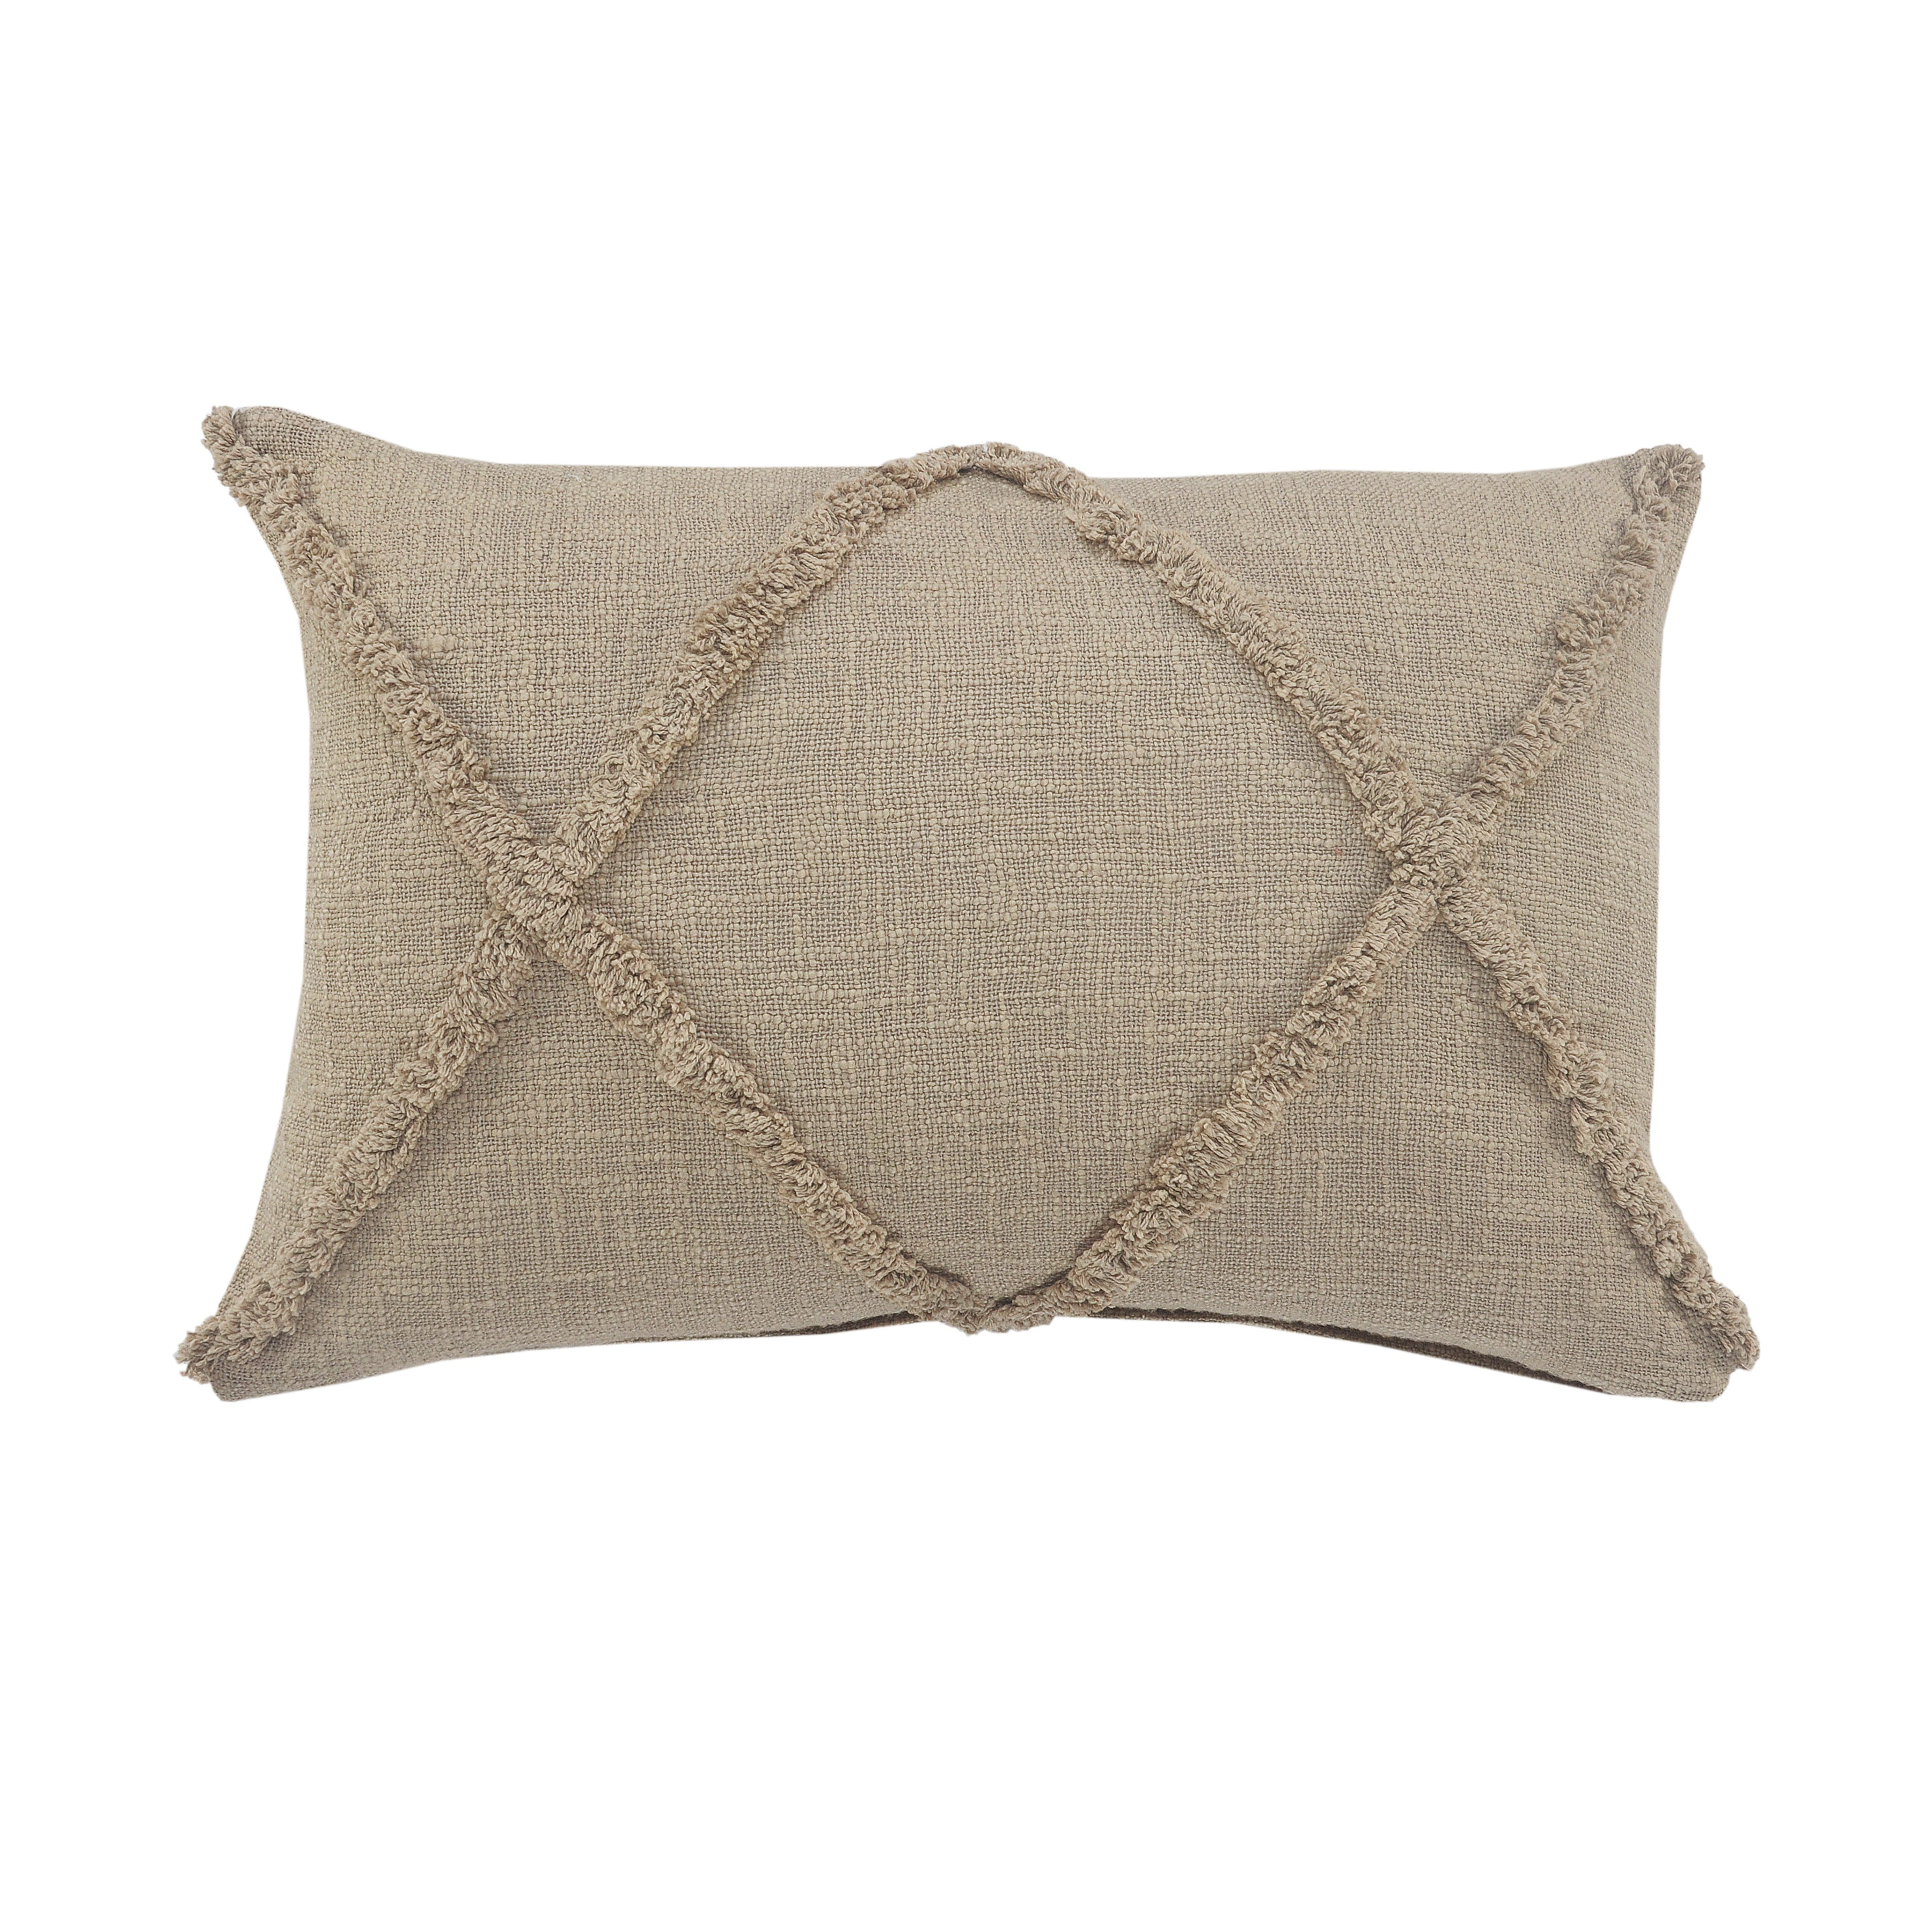 Flowershave357 Taupe Throw Pillow Cover Taupe Pillow Cover Brown Pillows Accent Pillows Lumbar Pillow Decorative Pillows for Couch Pillows 